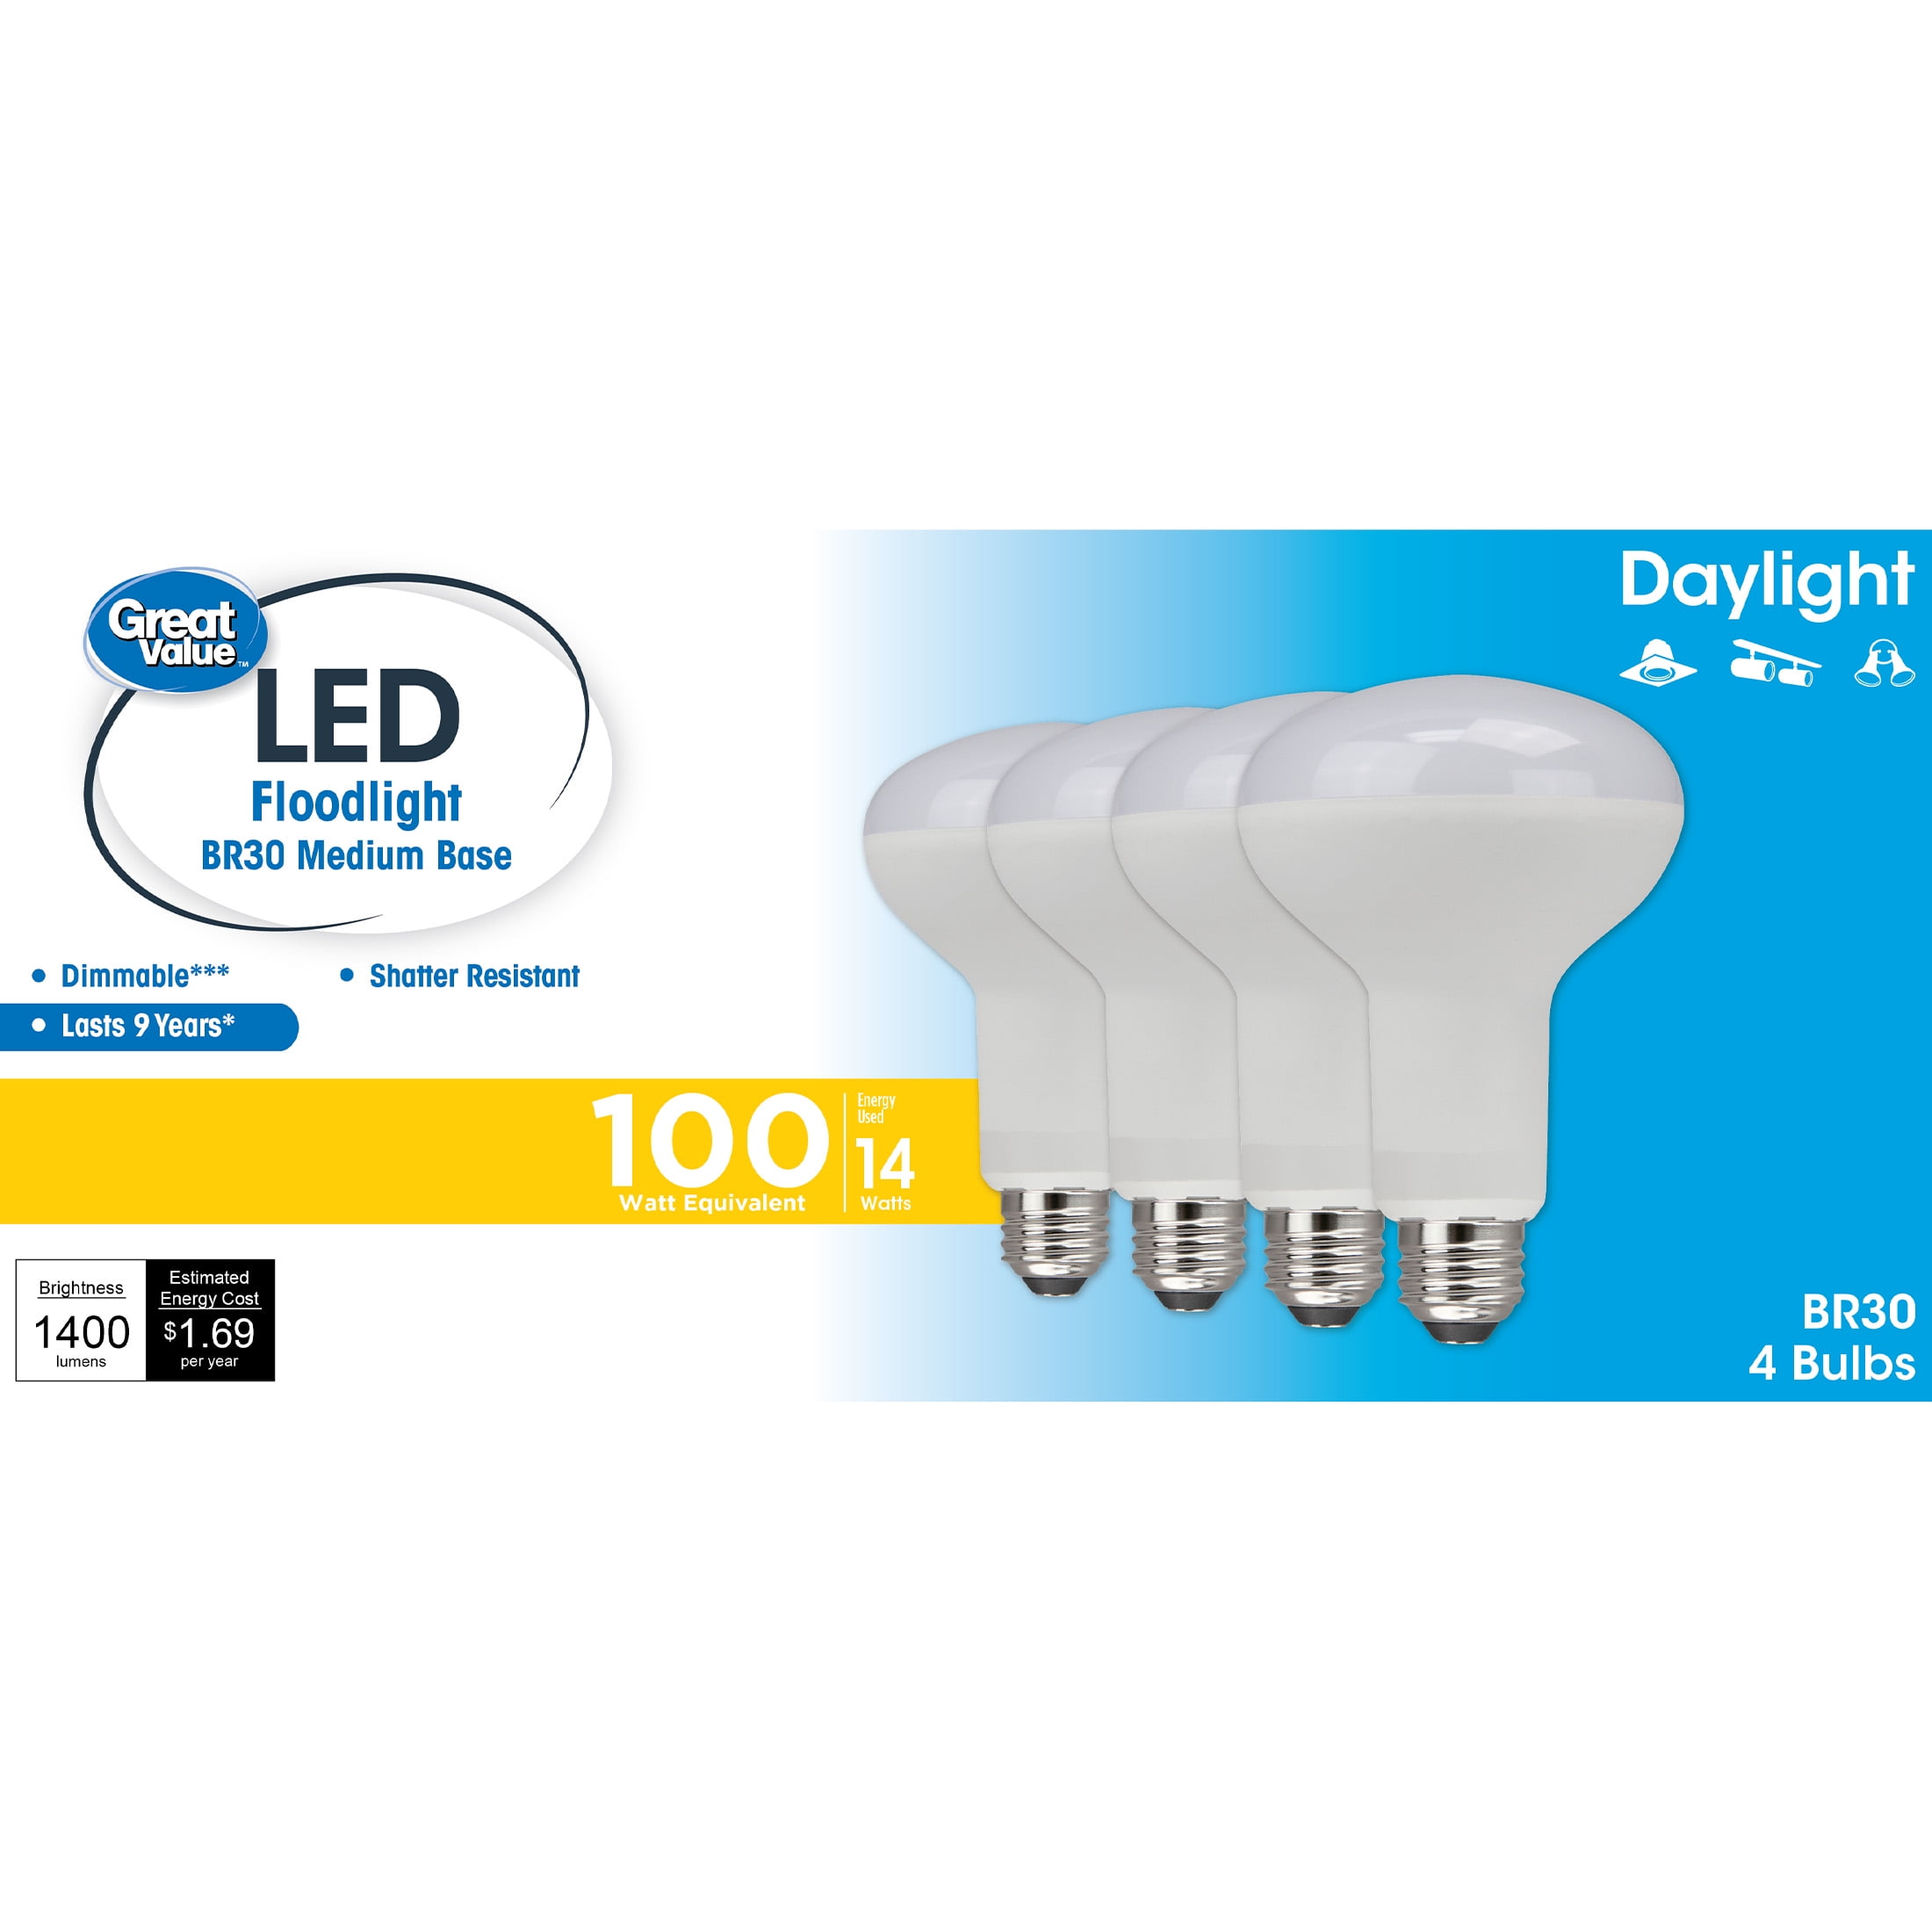 Great Value LED Light Bulb, 14 Watts (100W Equivalent) BR30 Floodlight Lamp E26 Medium Base, Dimmable, Daylight, 4-Pack